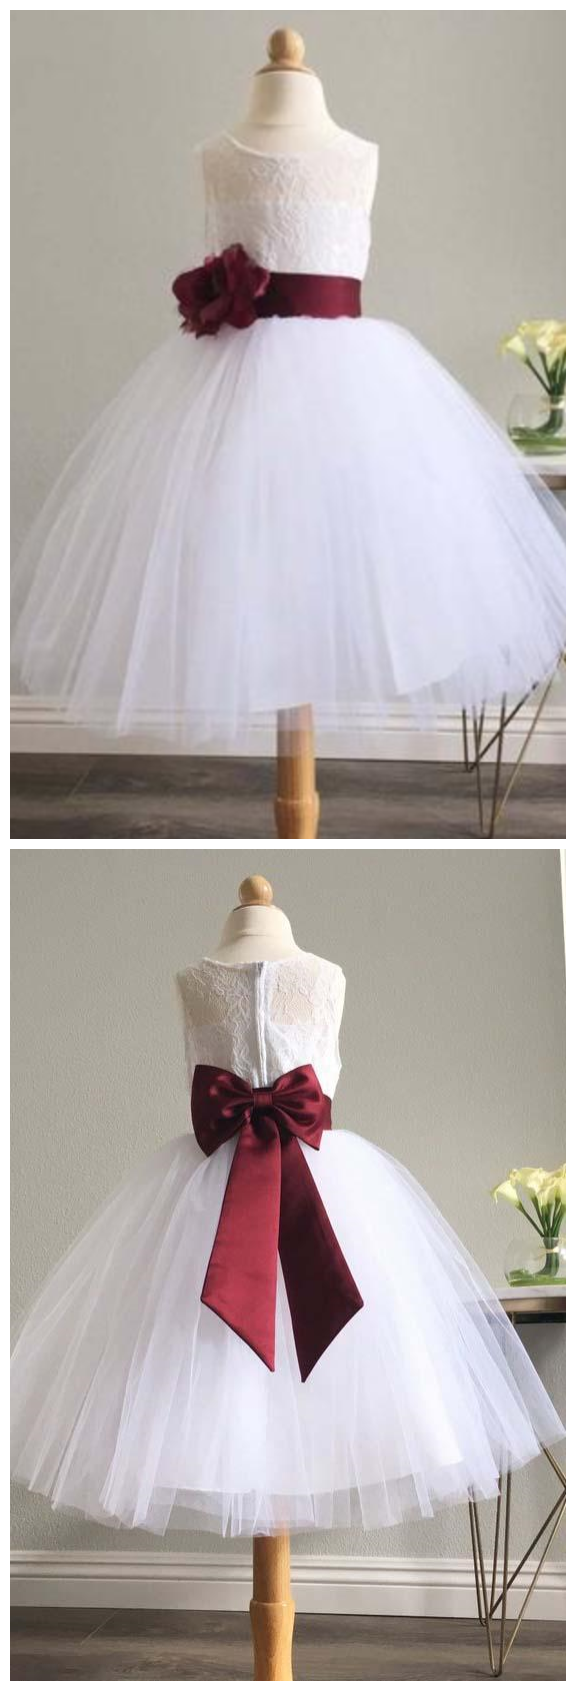 White Long Tulle Flower Girl Dress With Burgundy Sash, Puffy Sleeveless Dress With Bowknot